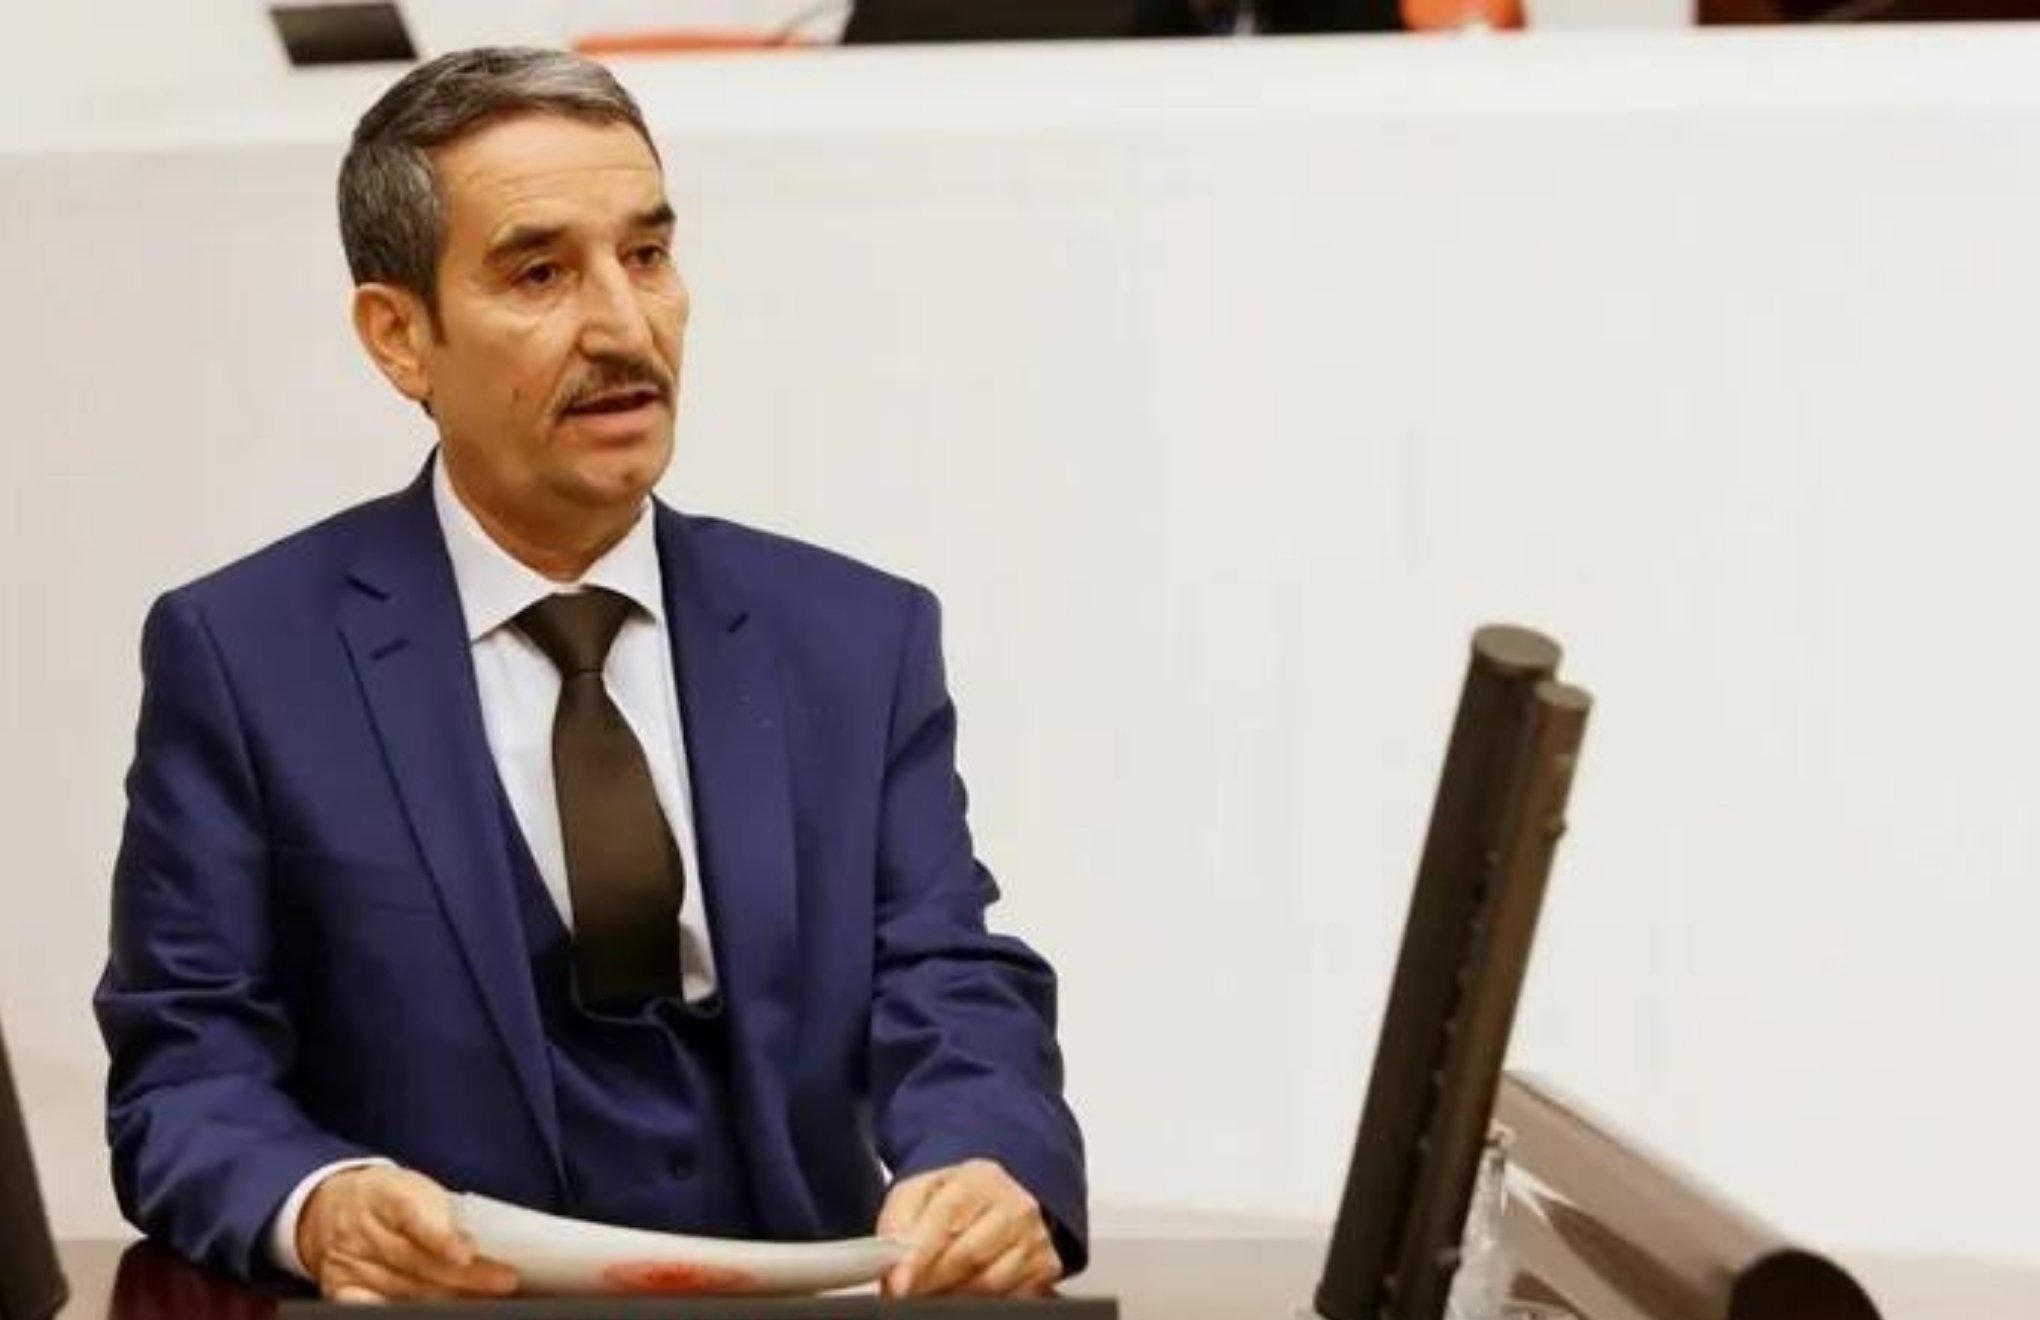 HDP MP Maçin suspended from Parliamentary sessions over ‘Kurdistan’ remarks